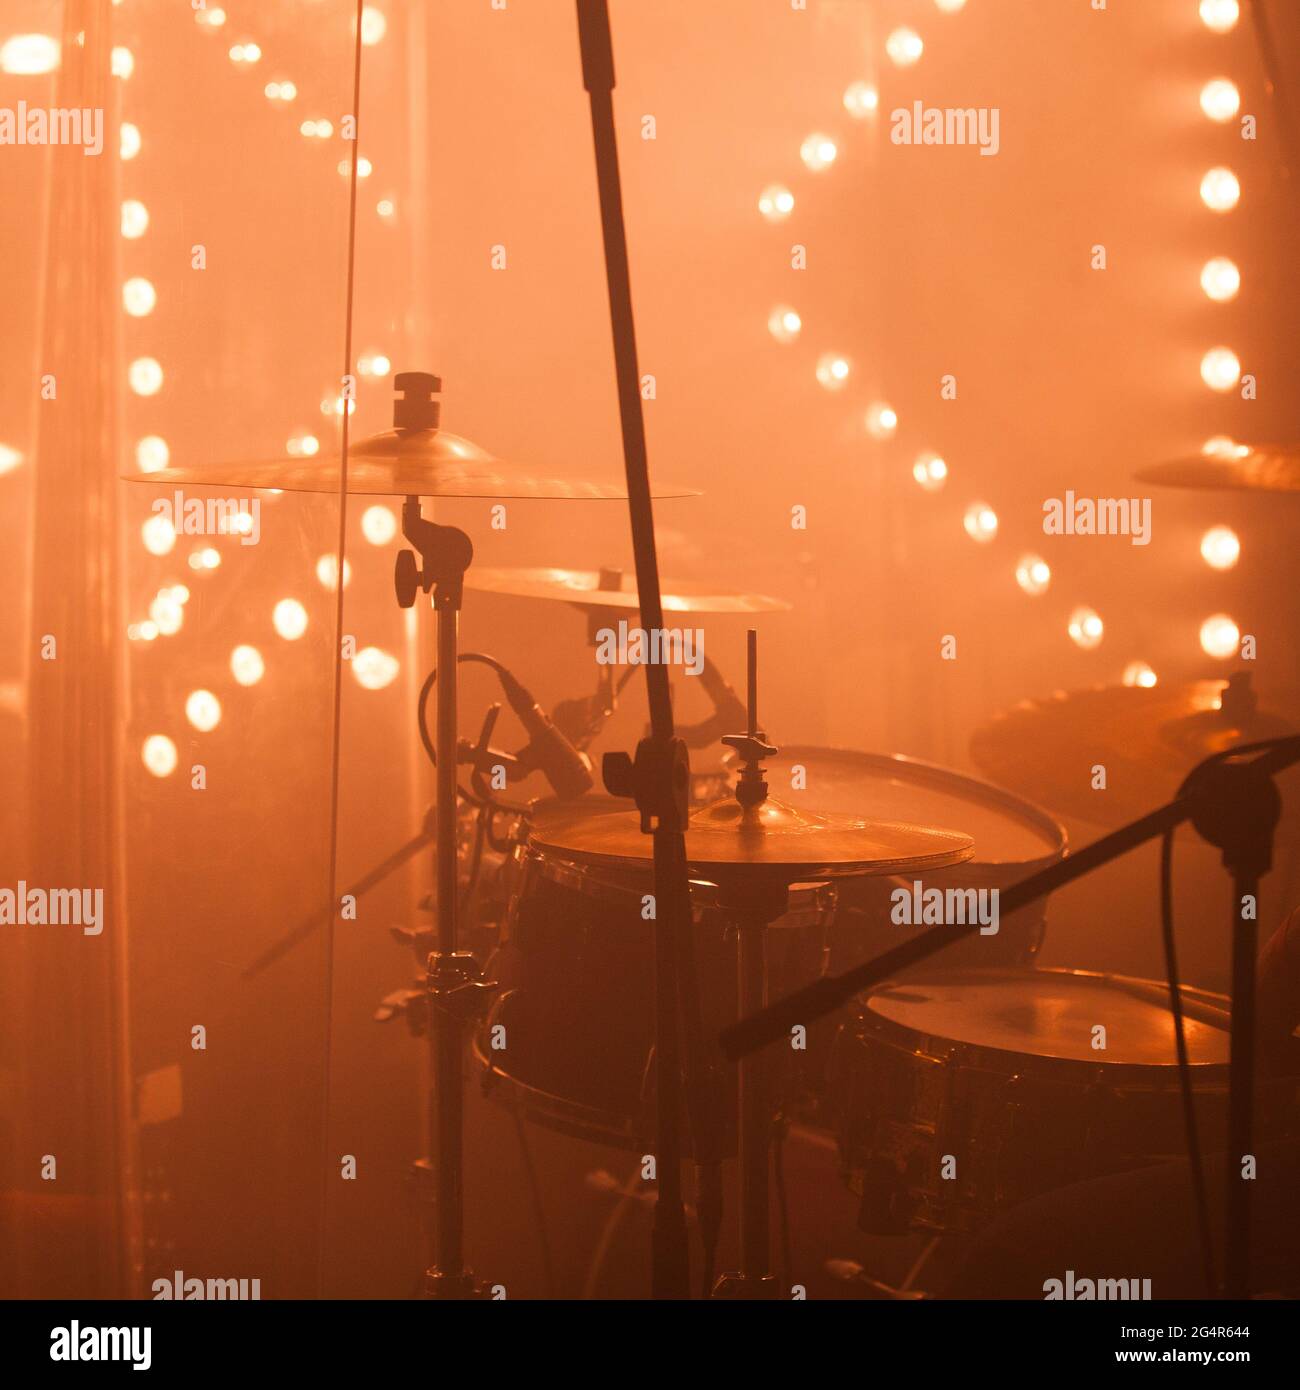 Rock band drum set with cymbals, live music square photo background Stock Photo